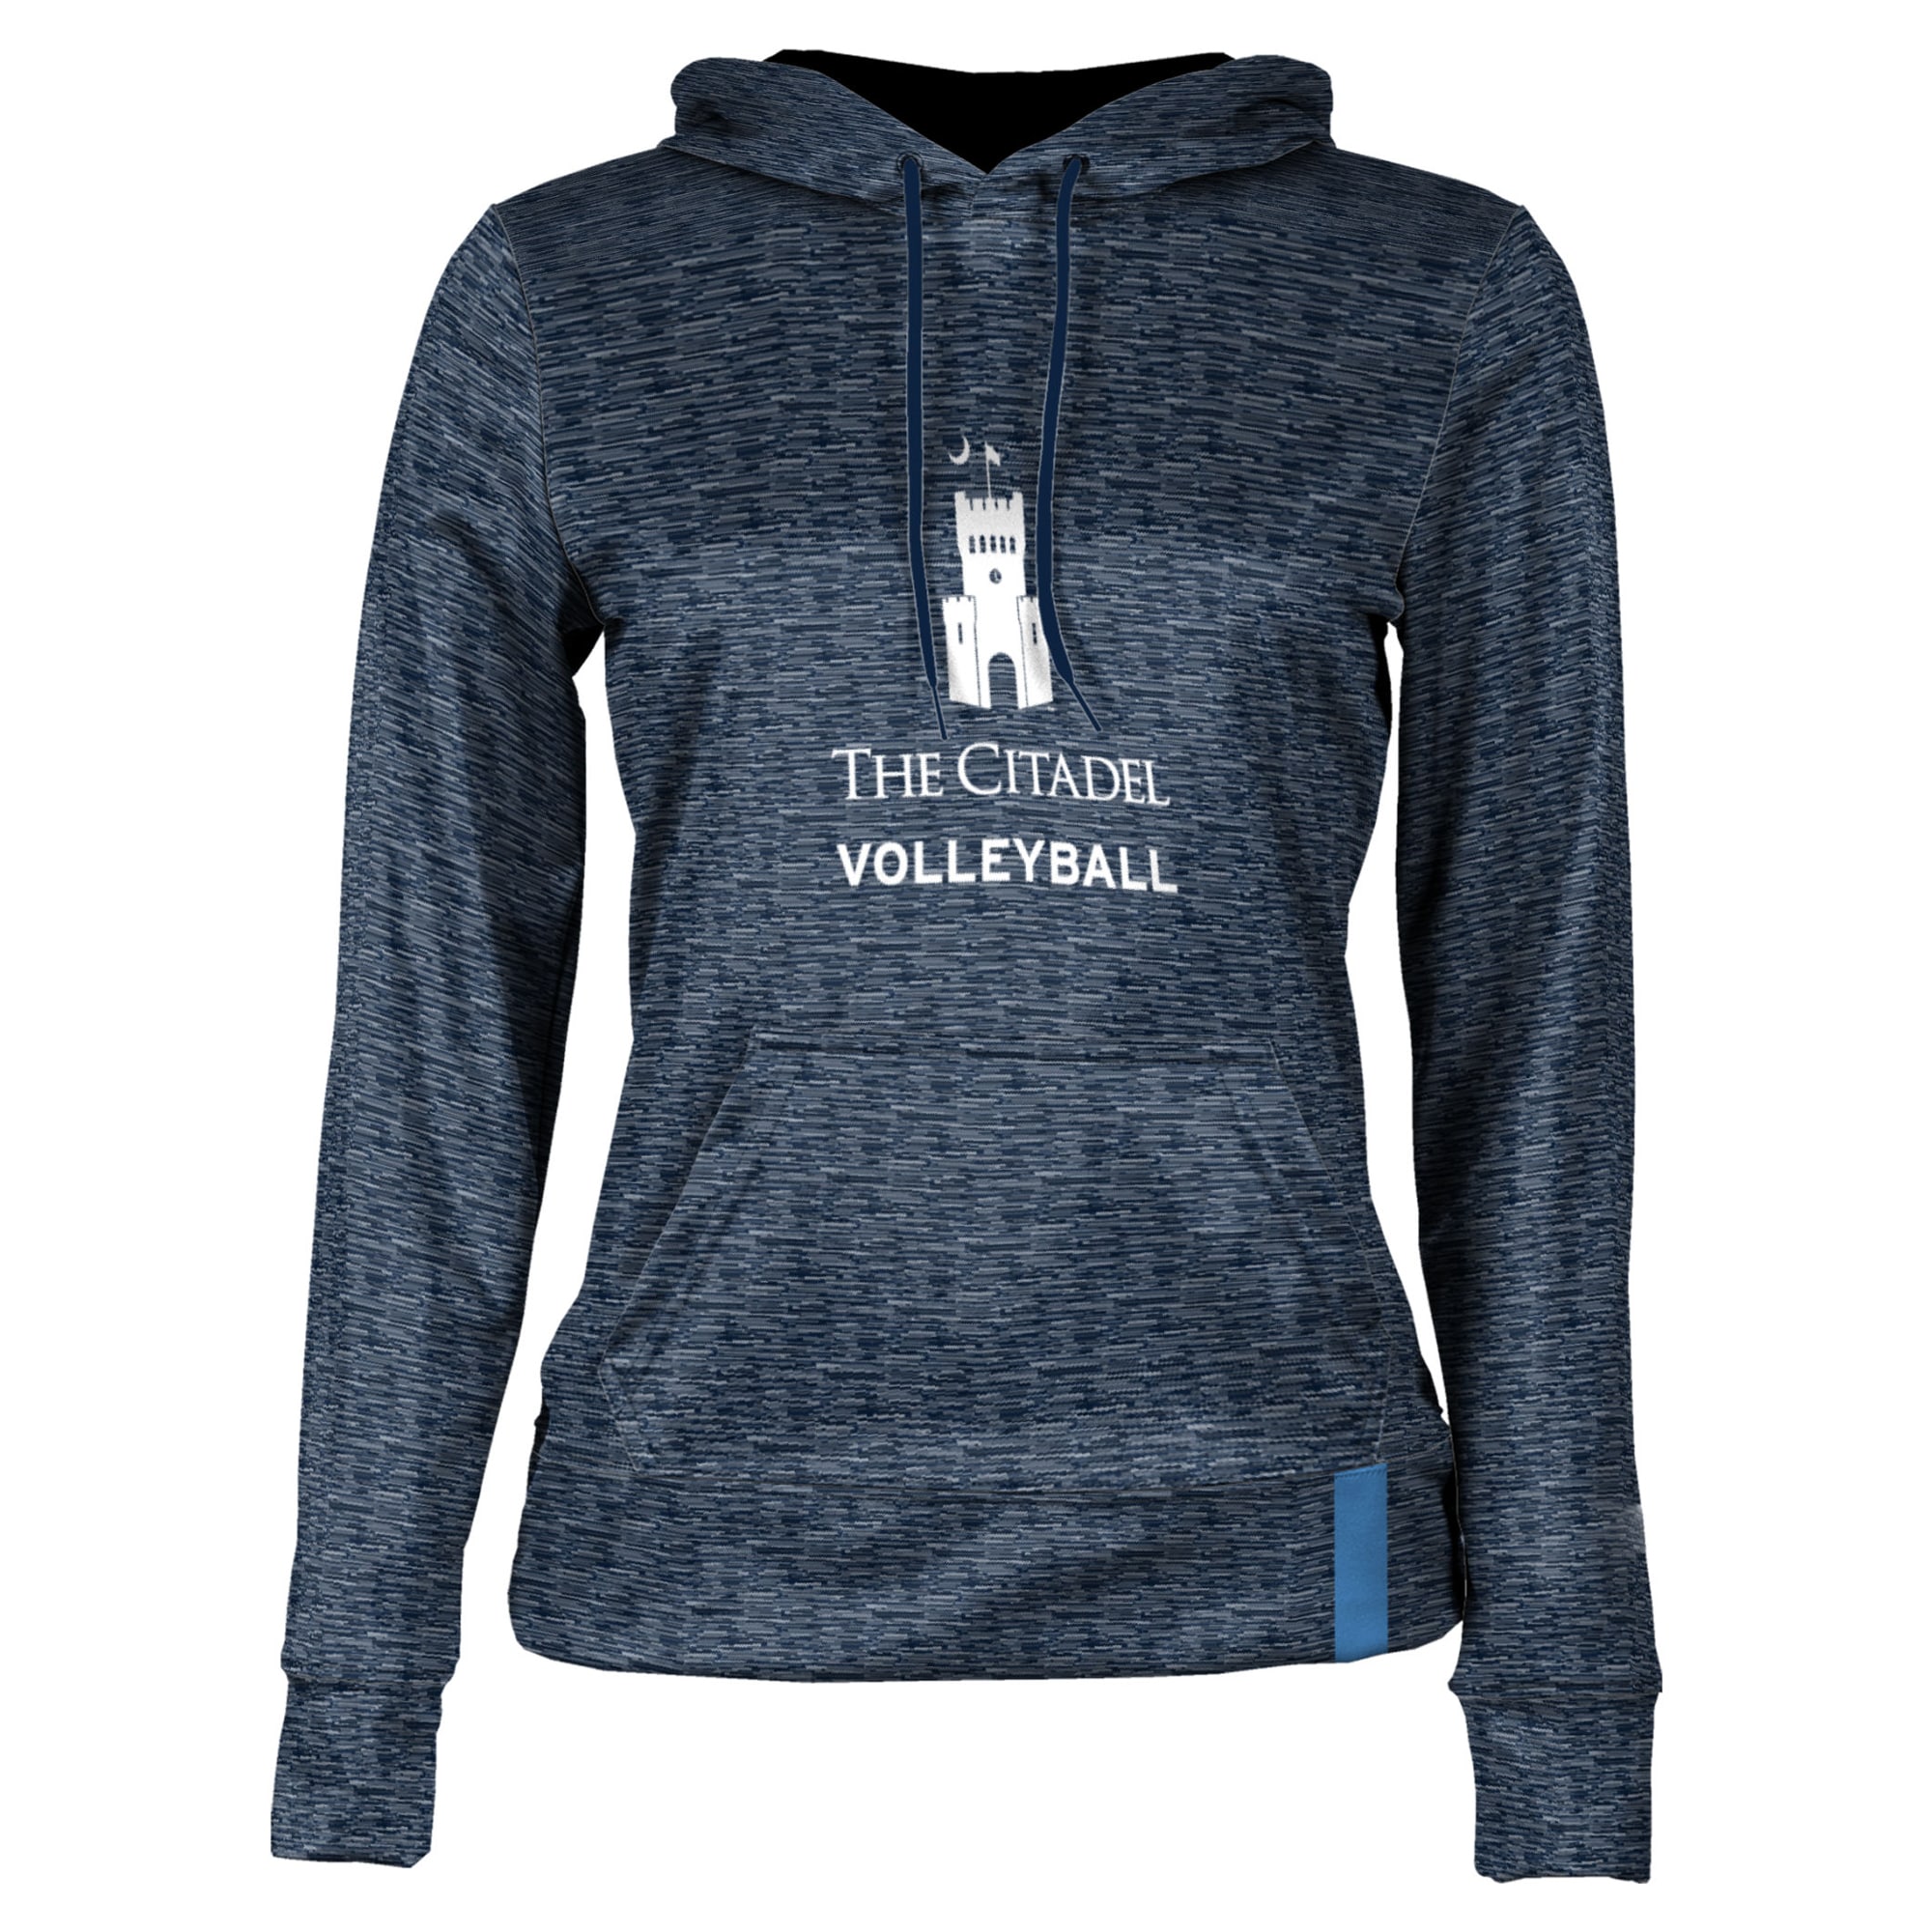 Women's Navy Citadel Bulldogs Volleyball Pullover Hoodie - image 2 of 3